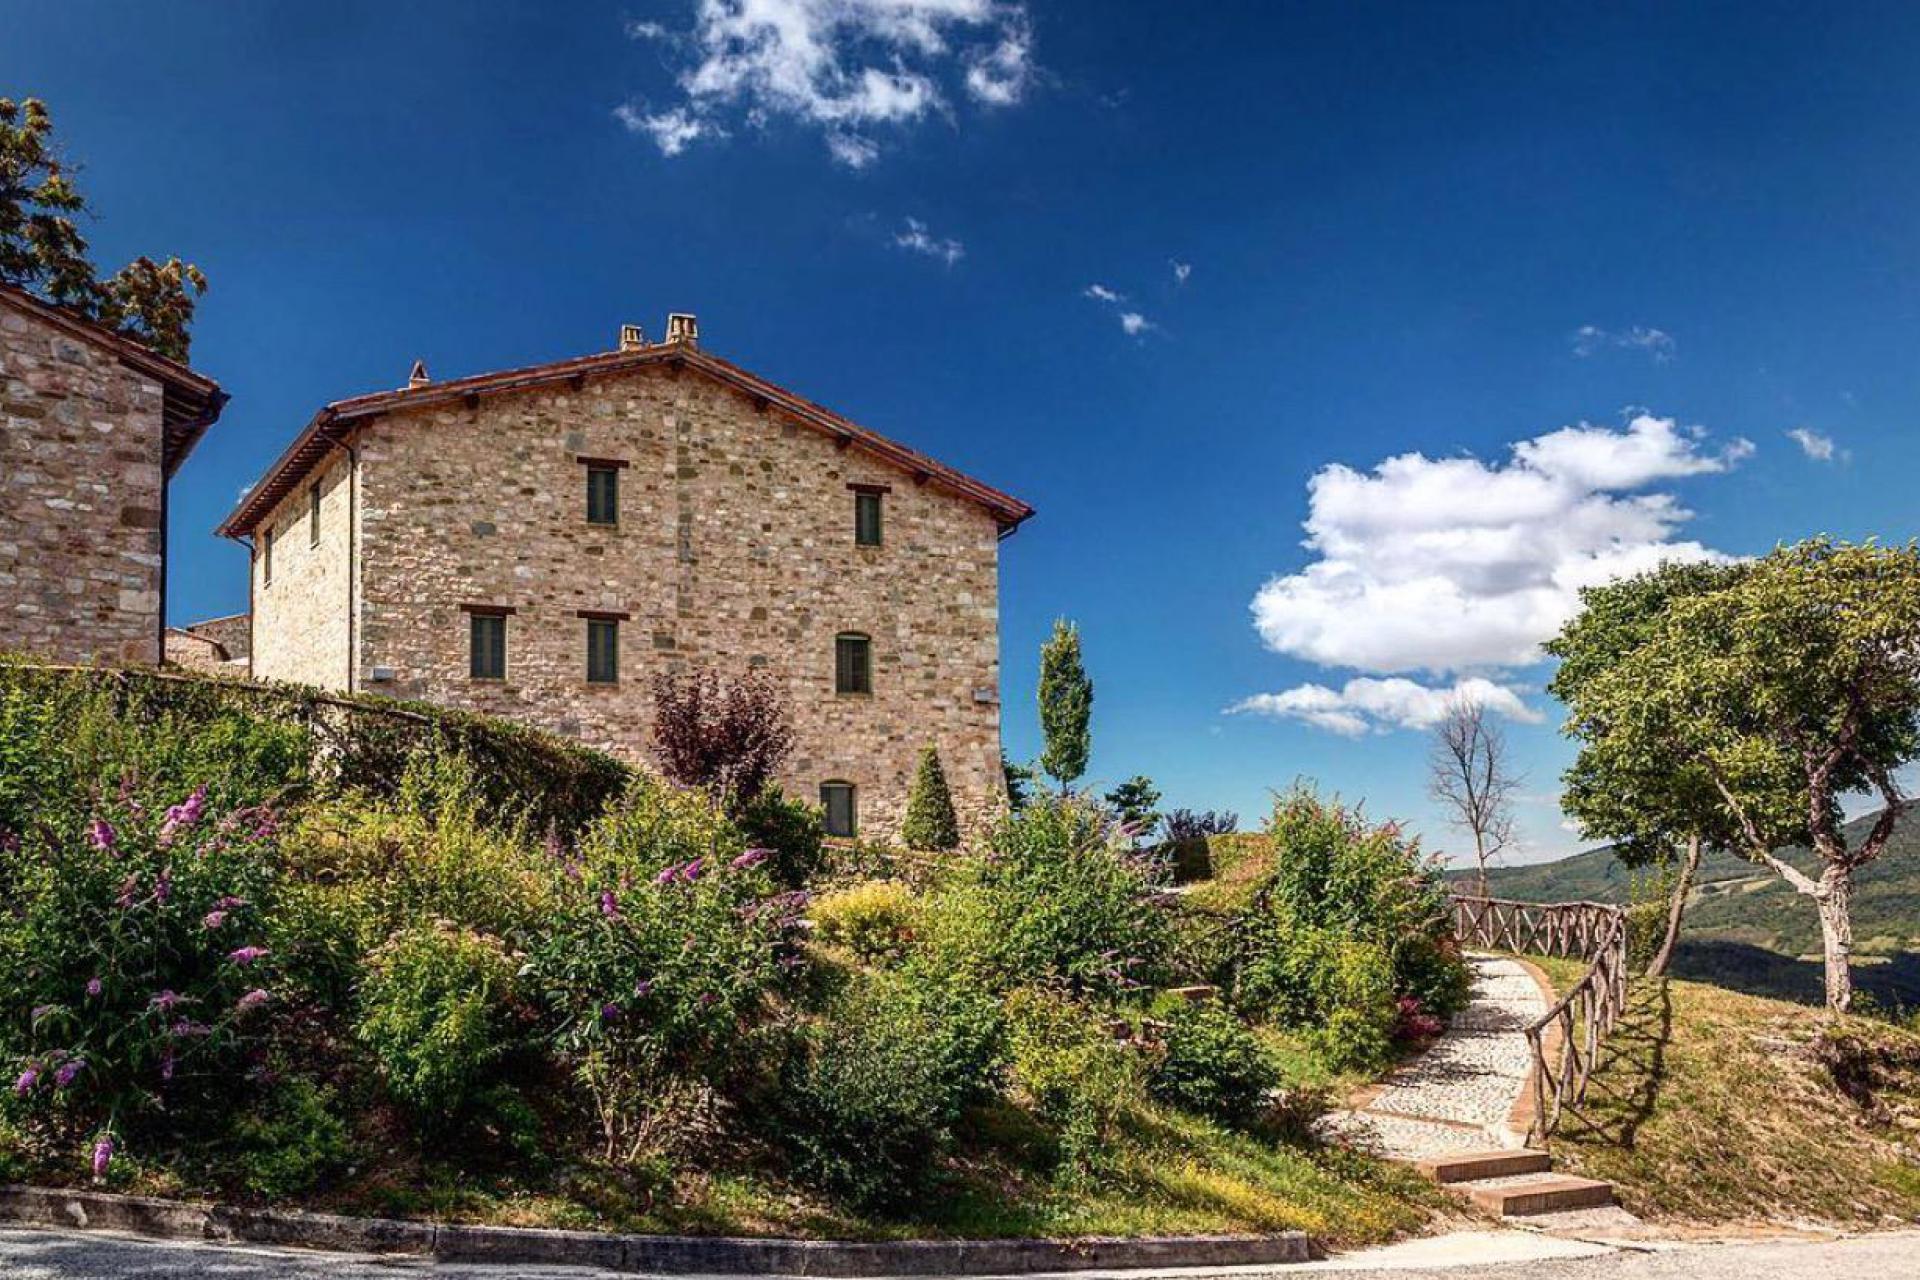 Agriturismo Umbria Family-friendly resort in the heart of Umbria